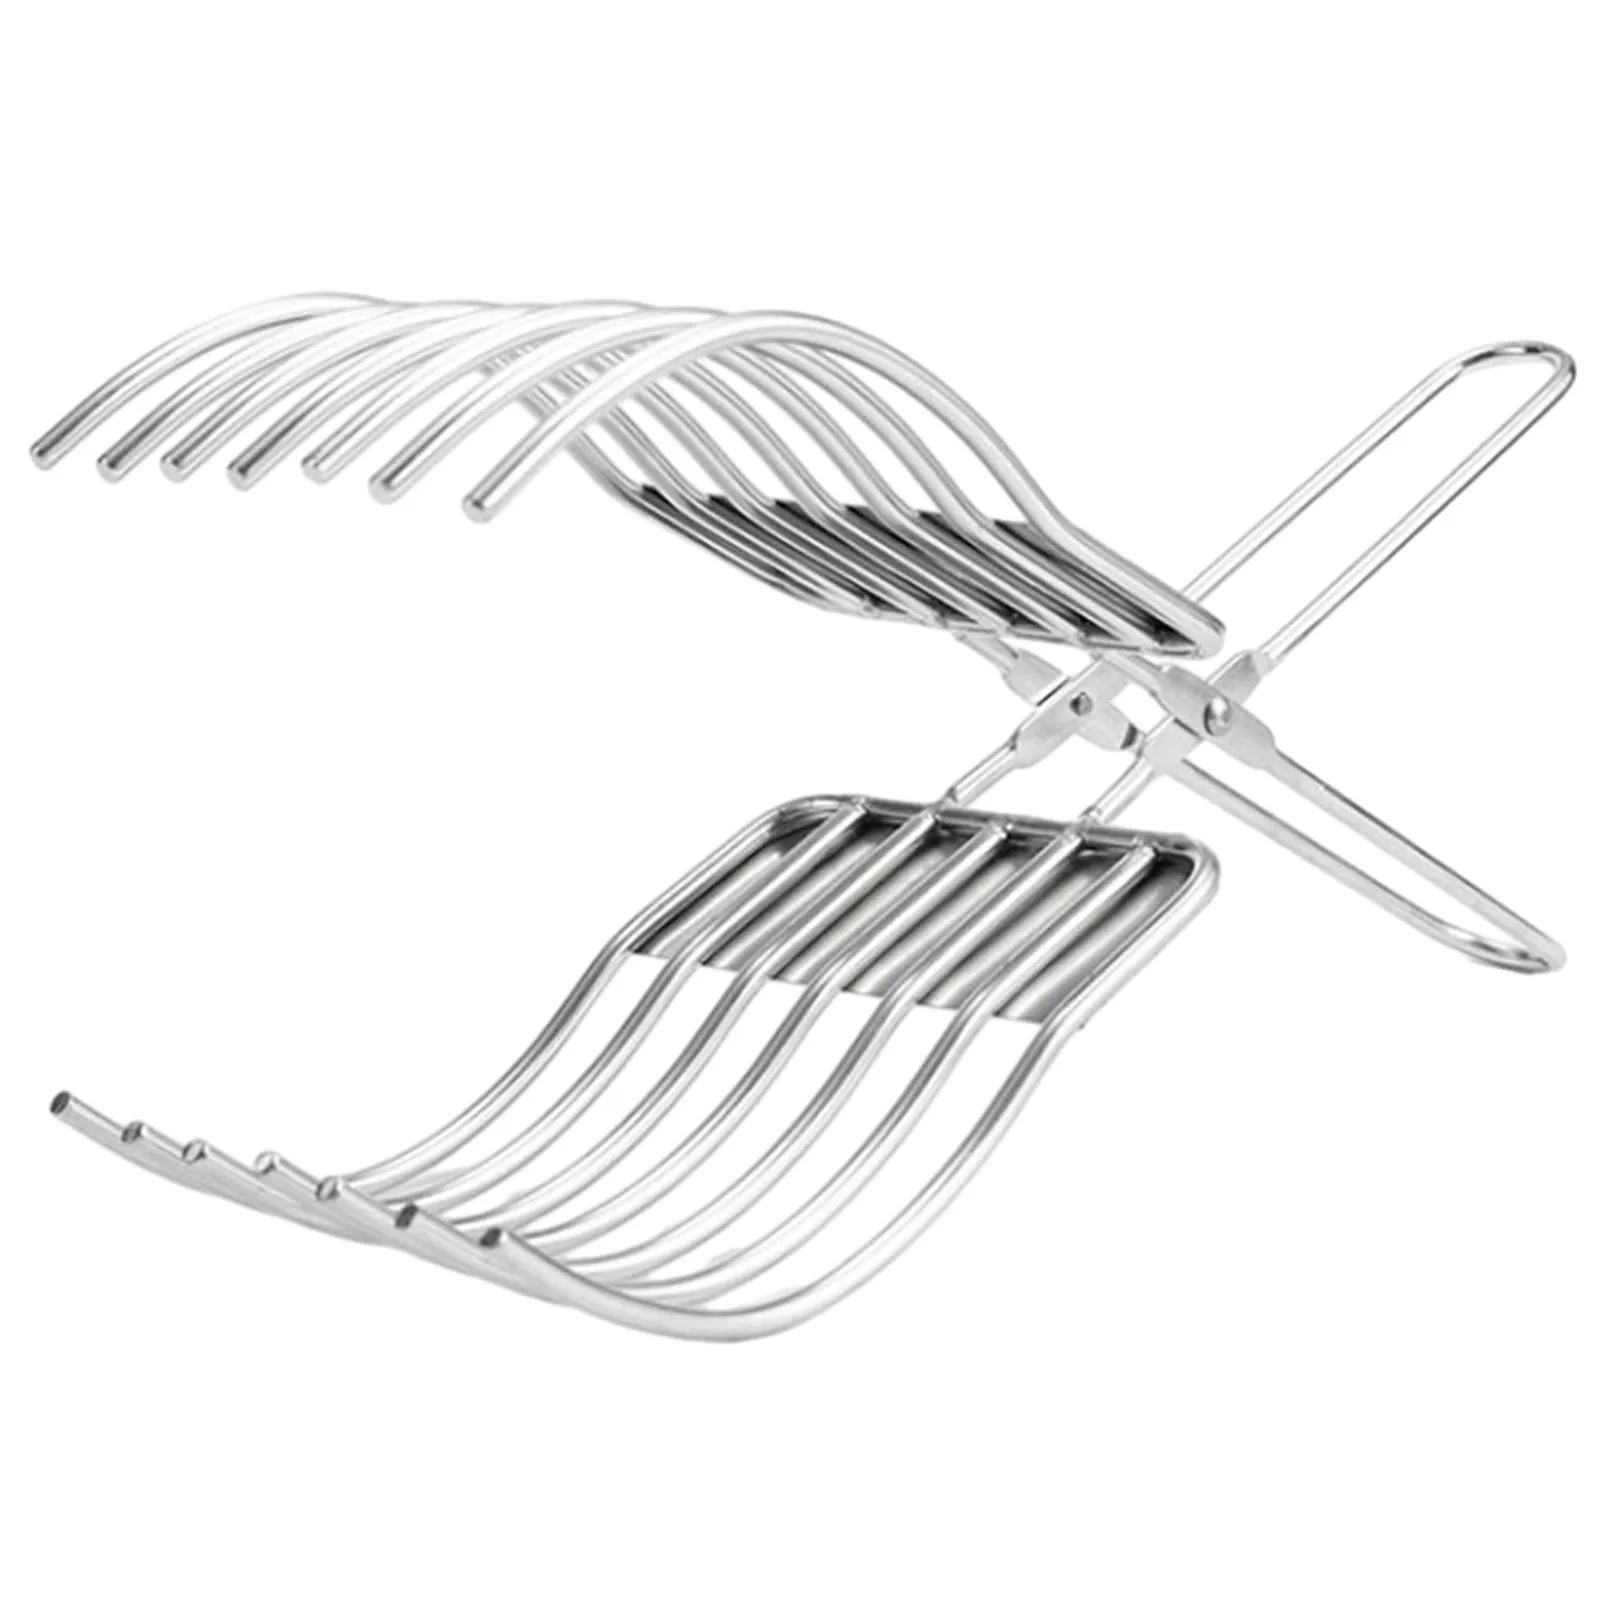 

Stainless Steel Roast Beef Cutting Tongs Meat Bread Slicing Tong Onion Tomato Holder For Slicing Vegetable Fruits Cutting Kitche